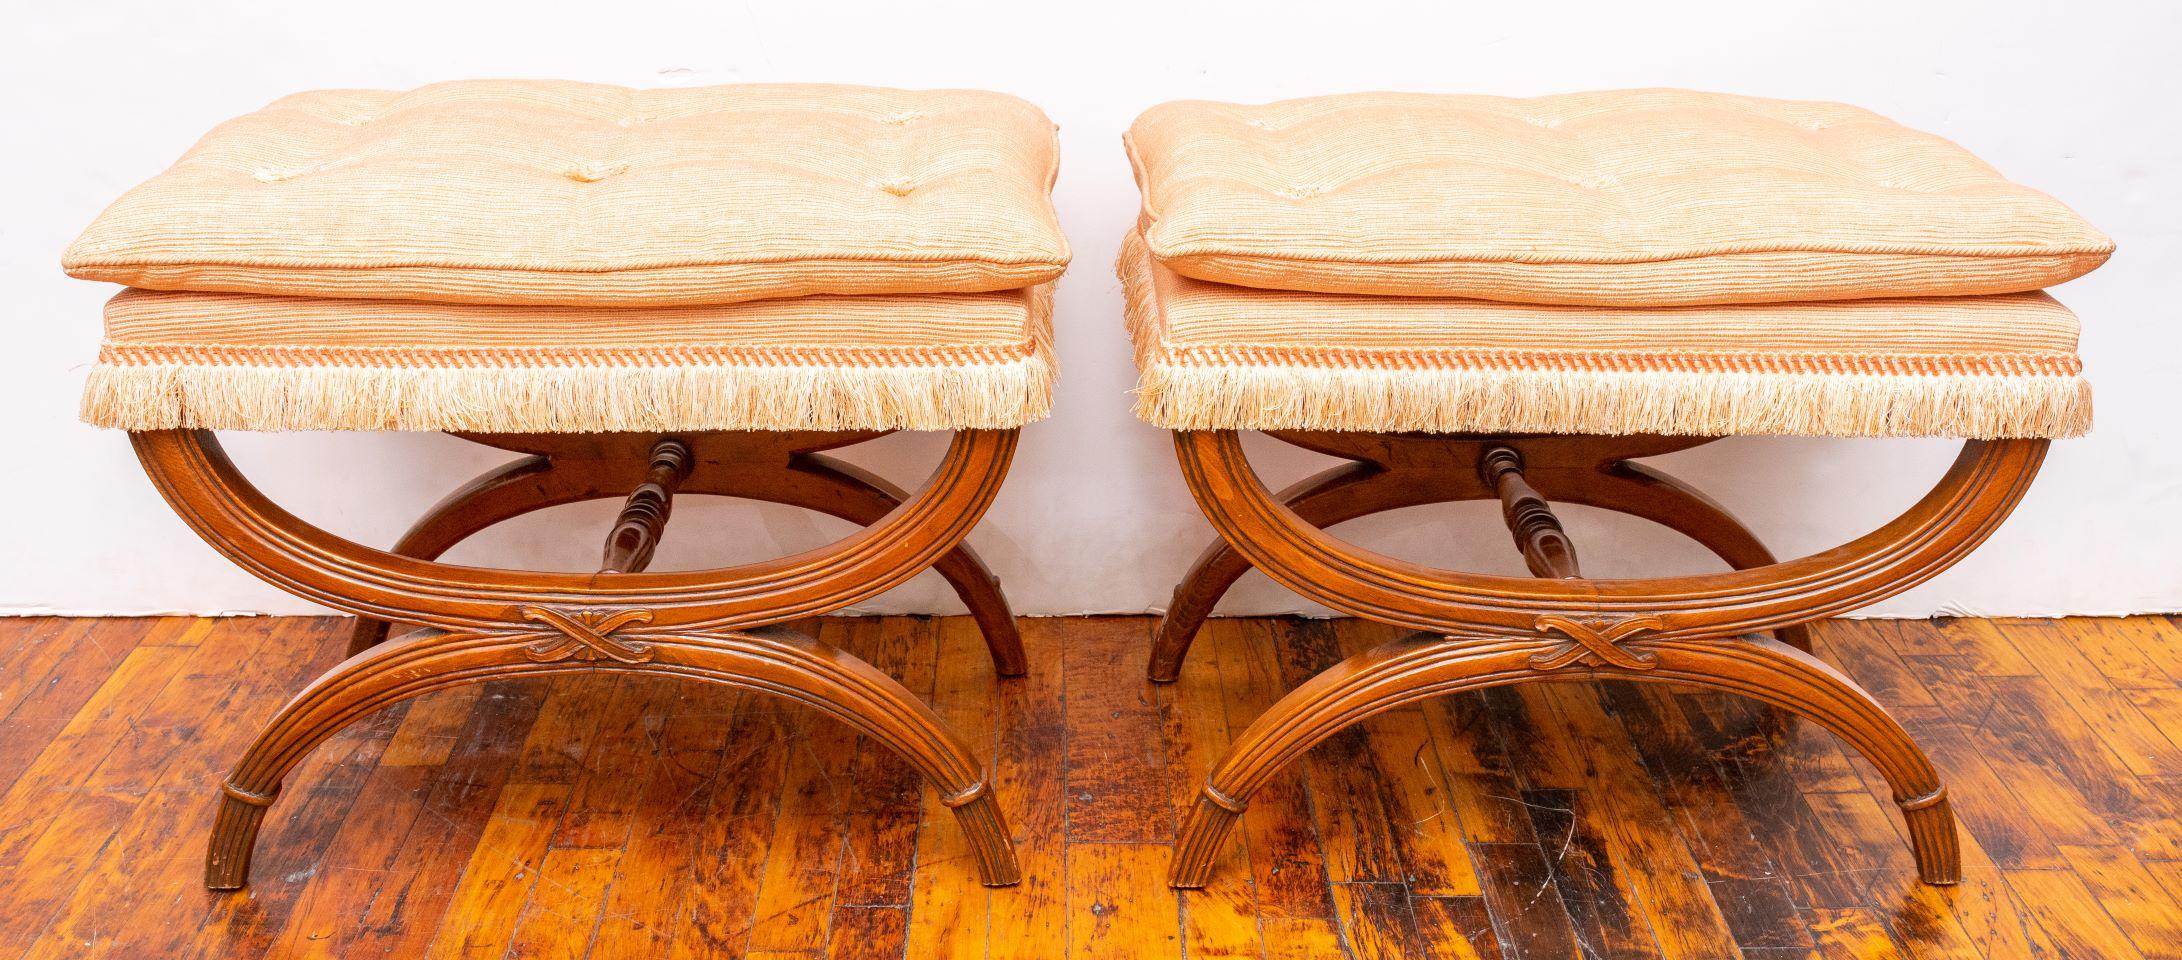 Pair of curule mahogany benches, upholstered in a peach fabric with matching fringe. Made in the 1970s. Very good vintage condition.